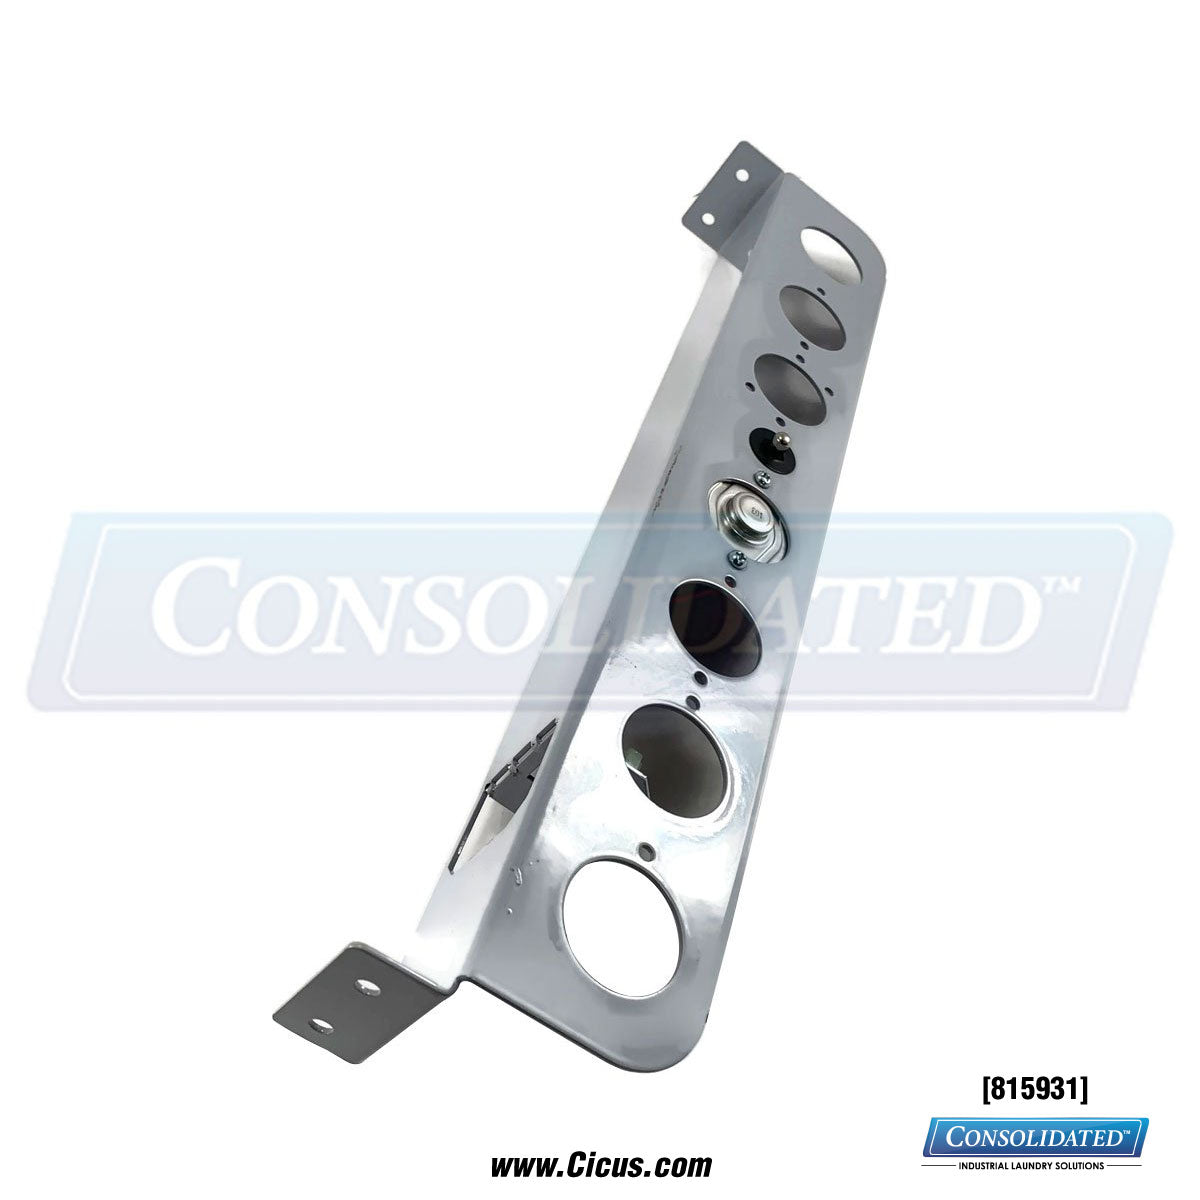 ADC AD-170 / 175 / 190 Sensor Bracket Assembly - Complete [815931] - back View